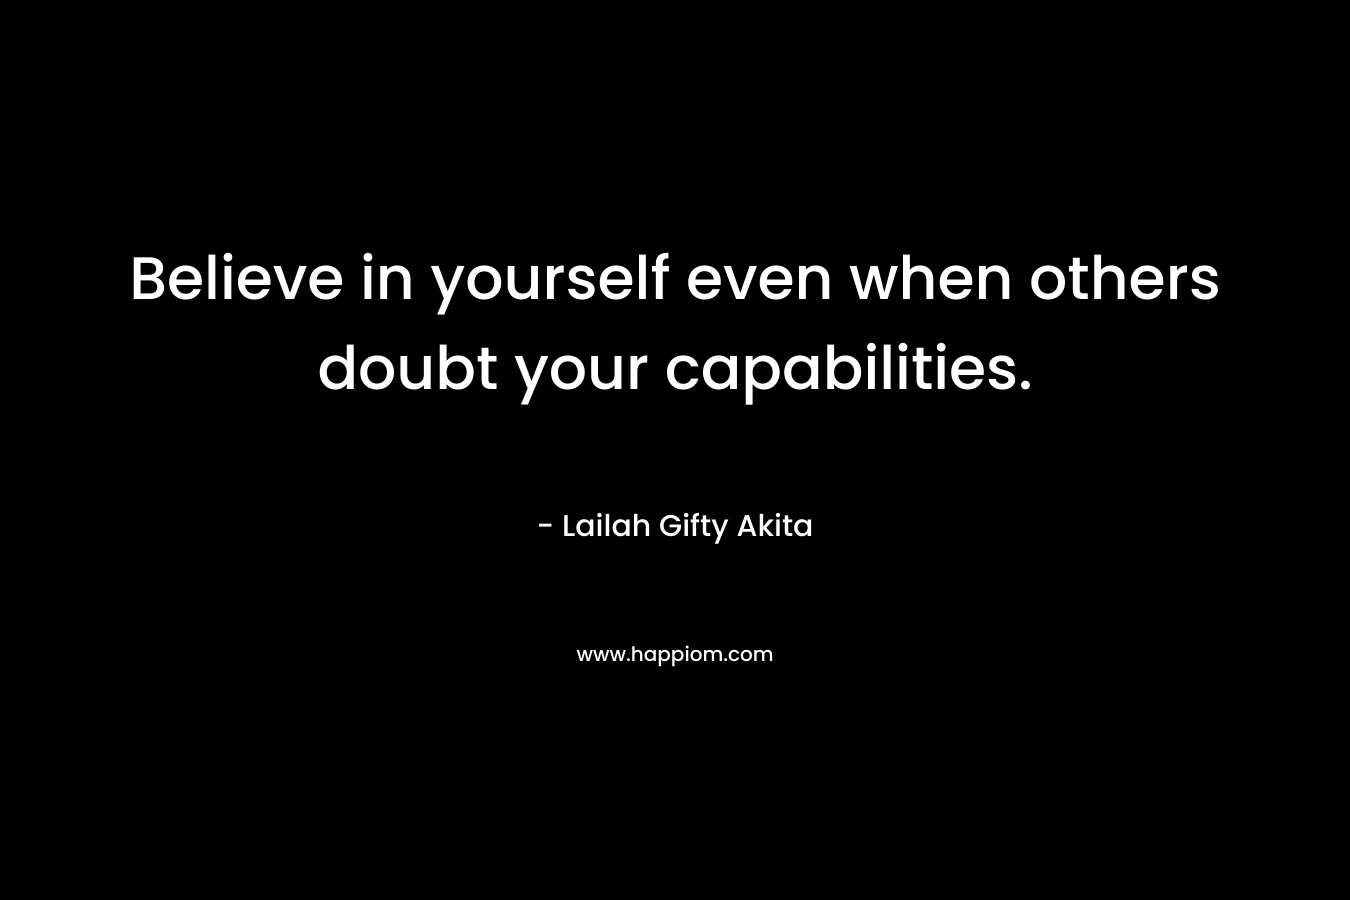 Believe in yourself even when others doubt your capabilities. – Lailah Gifty Akita